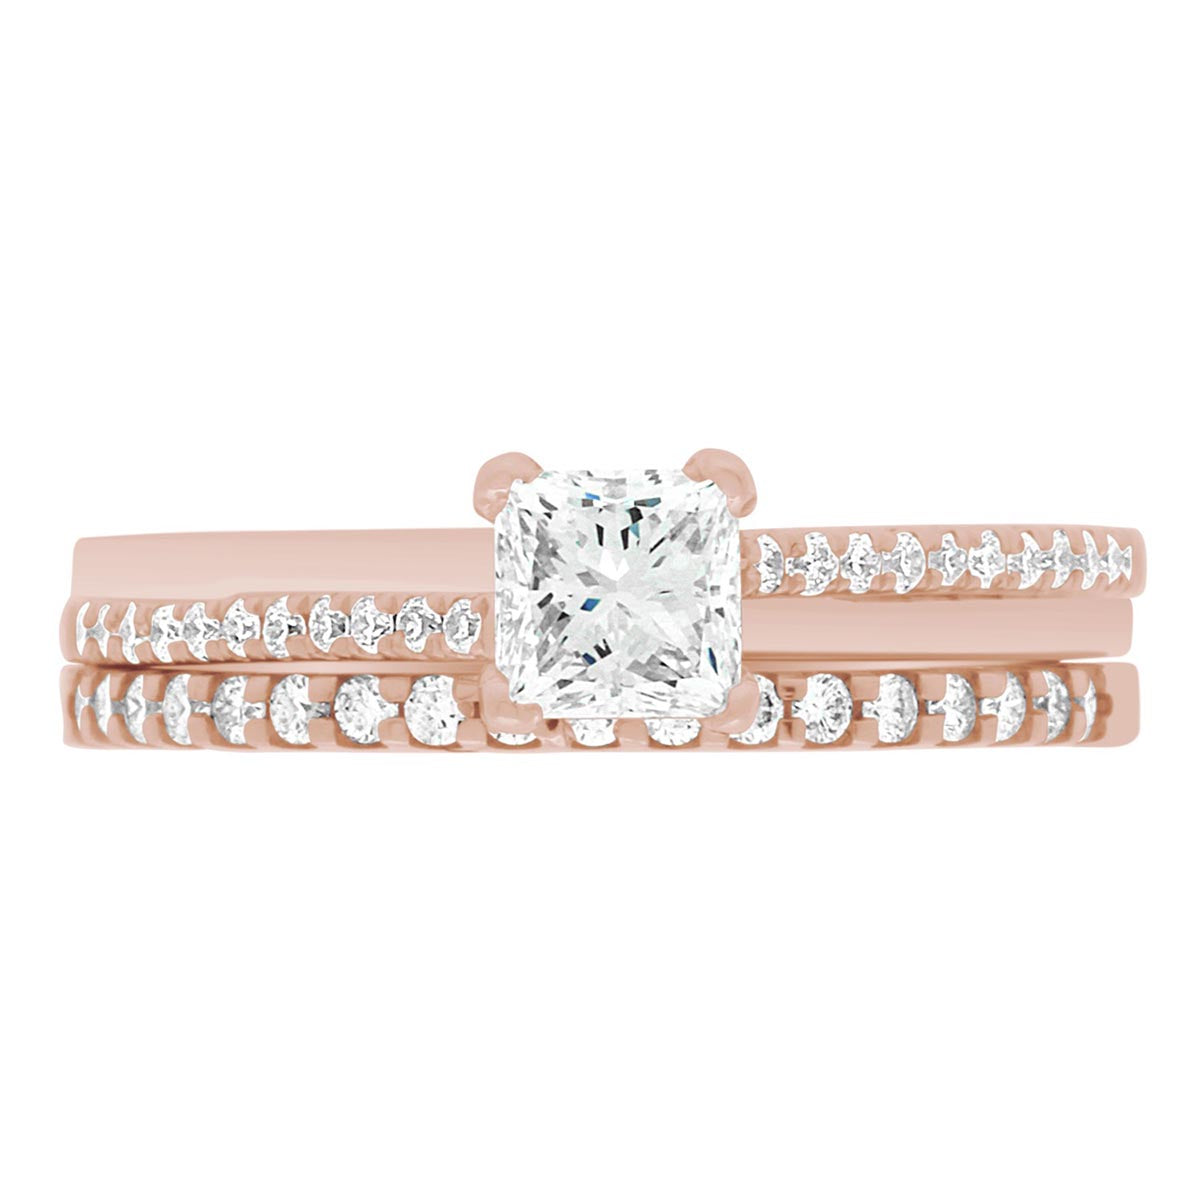 Promise Ring Style made from rose gold pictured with a diamond wedding band